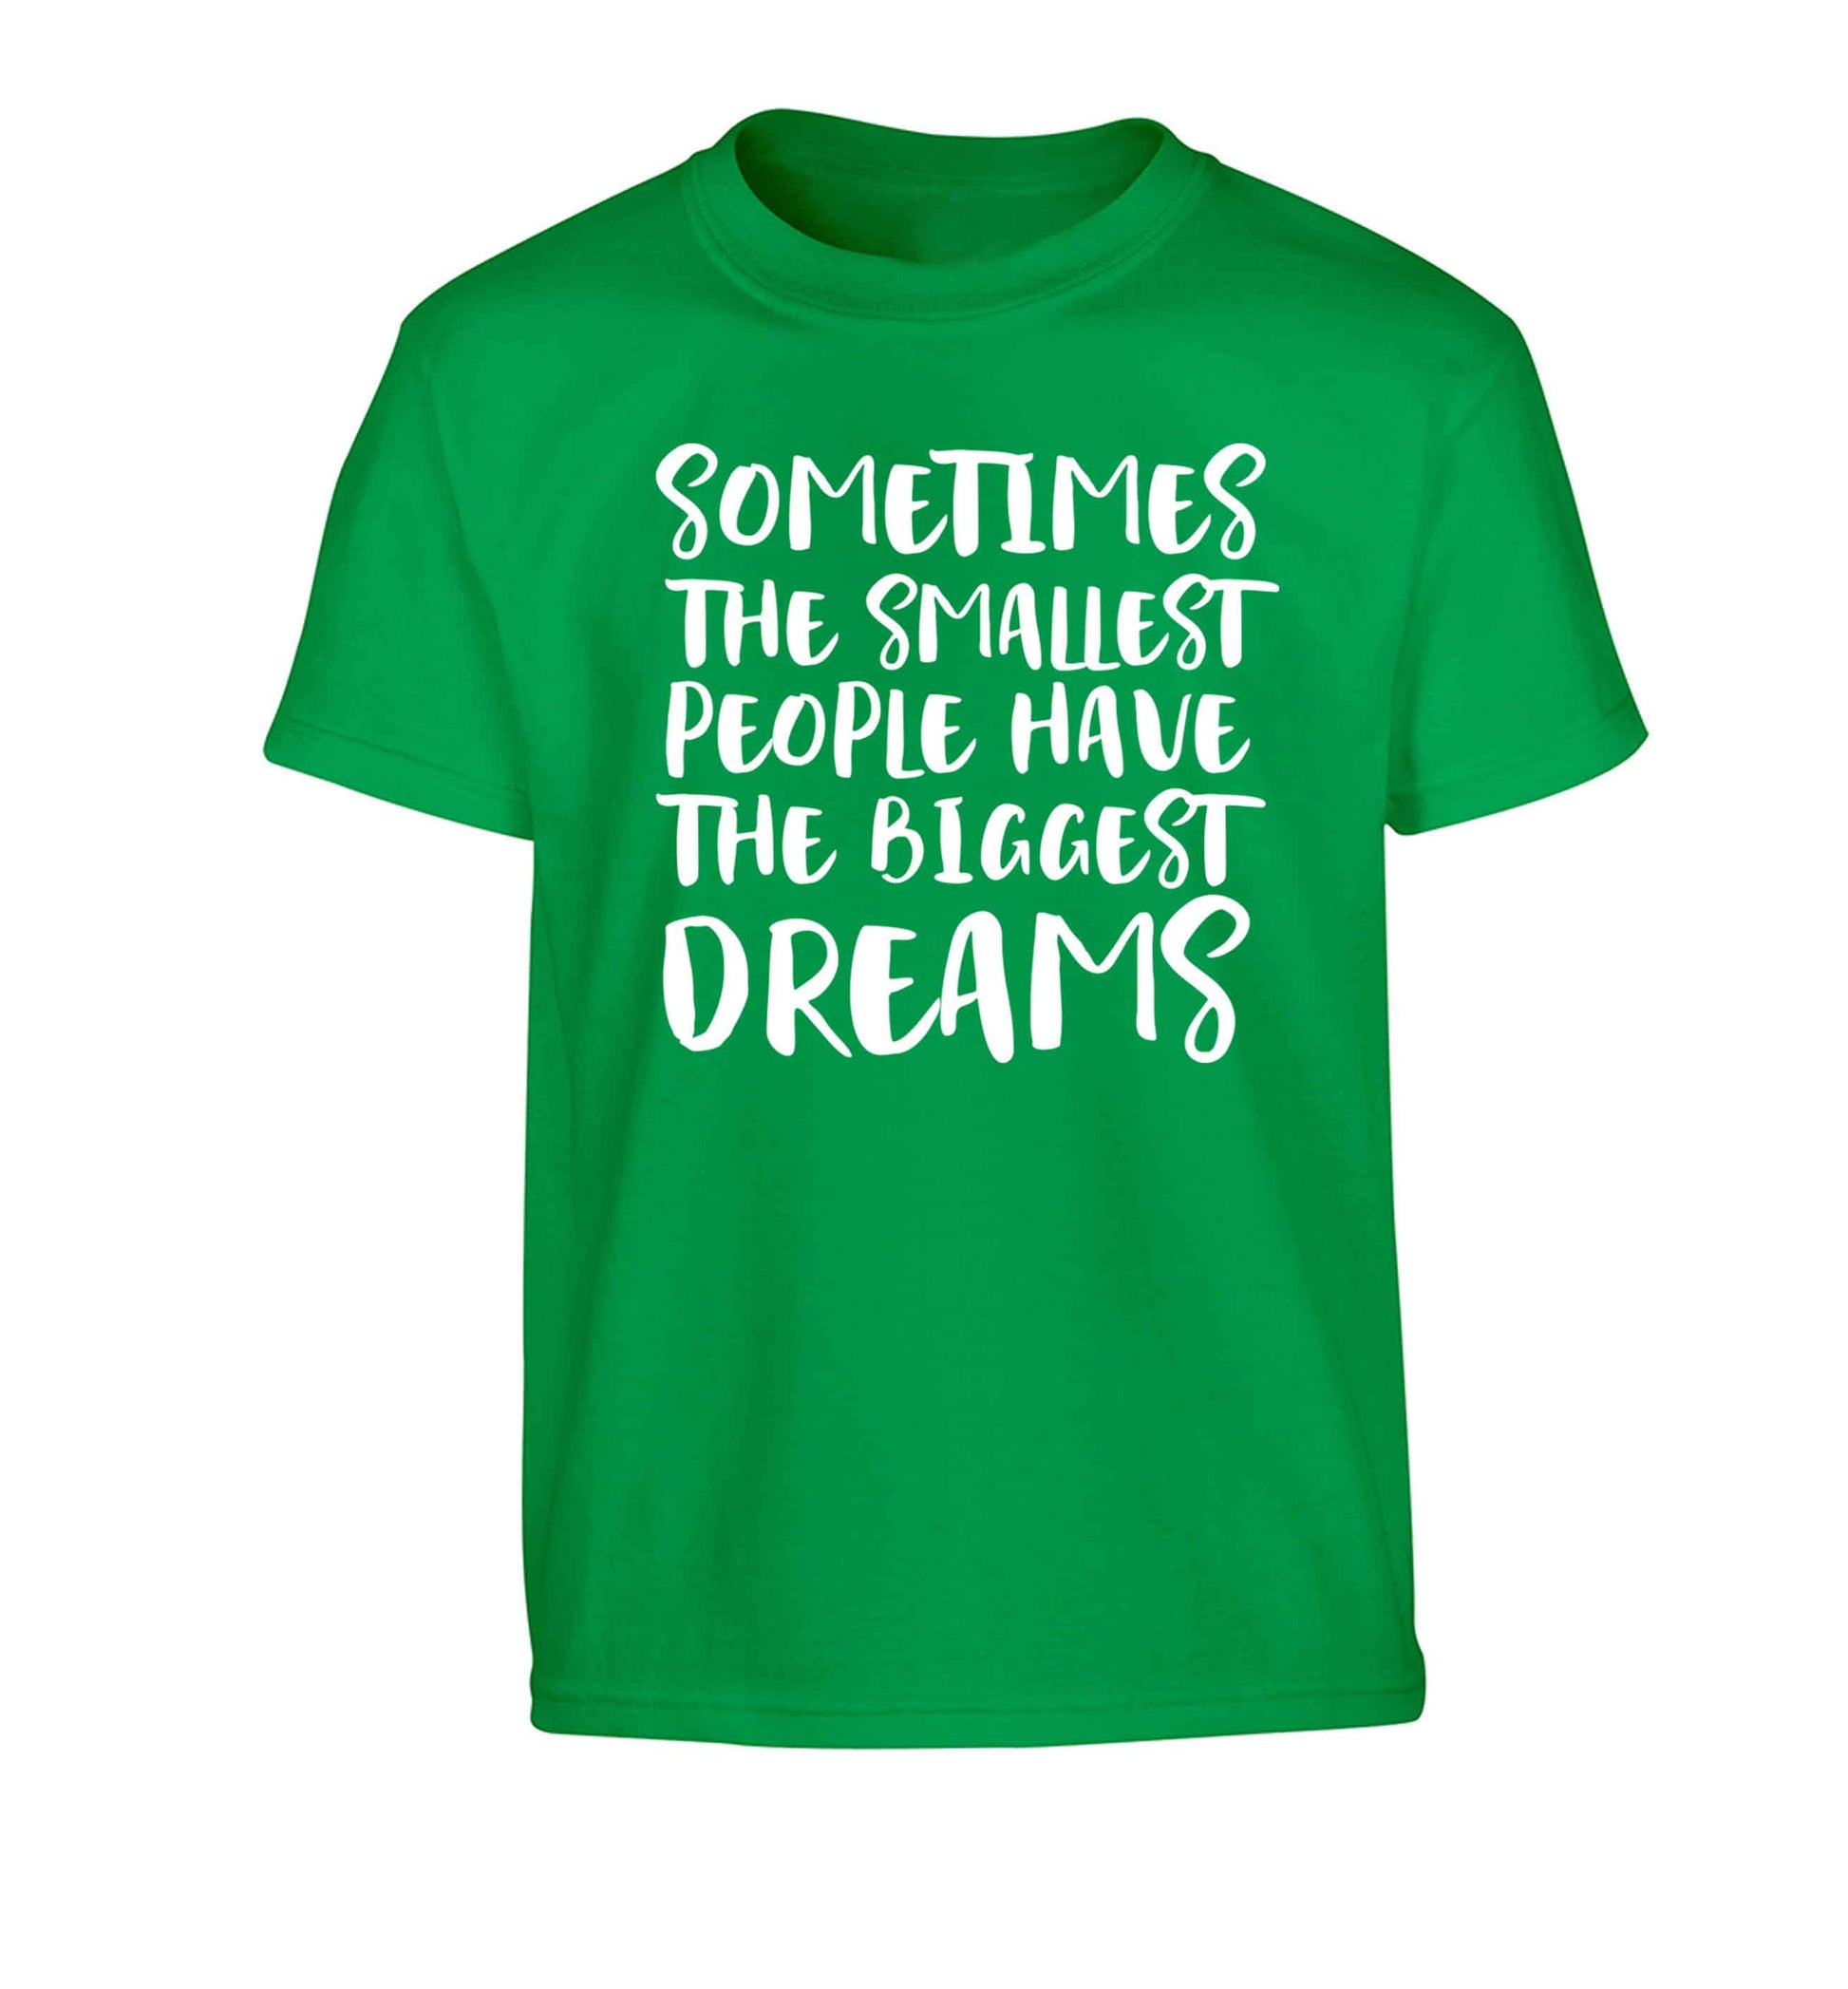 Sometimes the smallest people have the biggest dreams Children's green Tshirt 12-13 Years